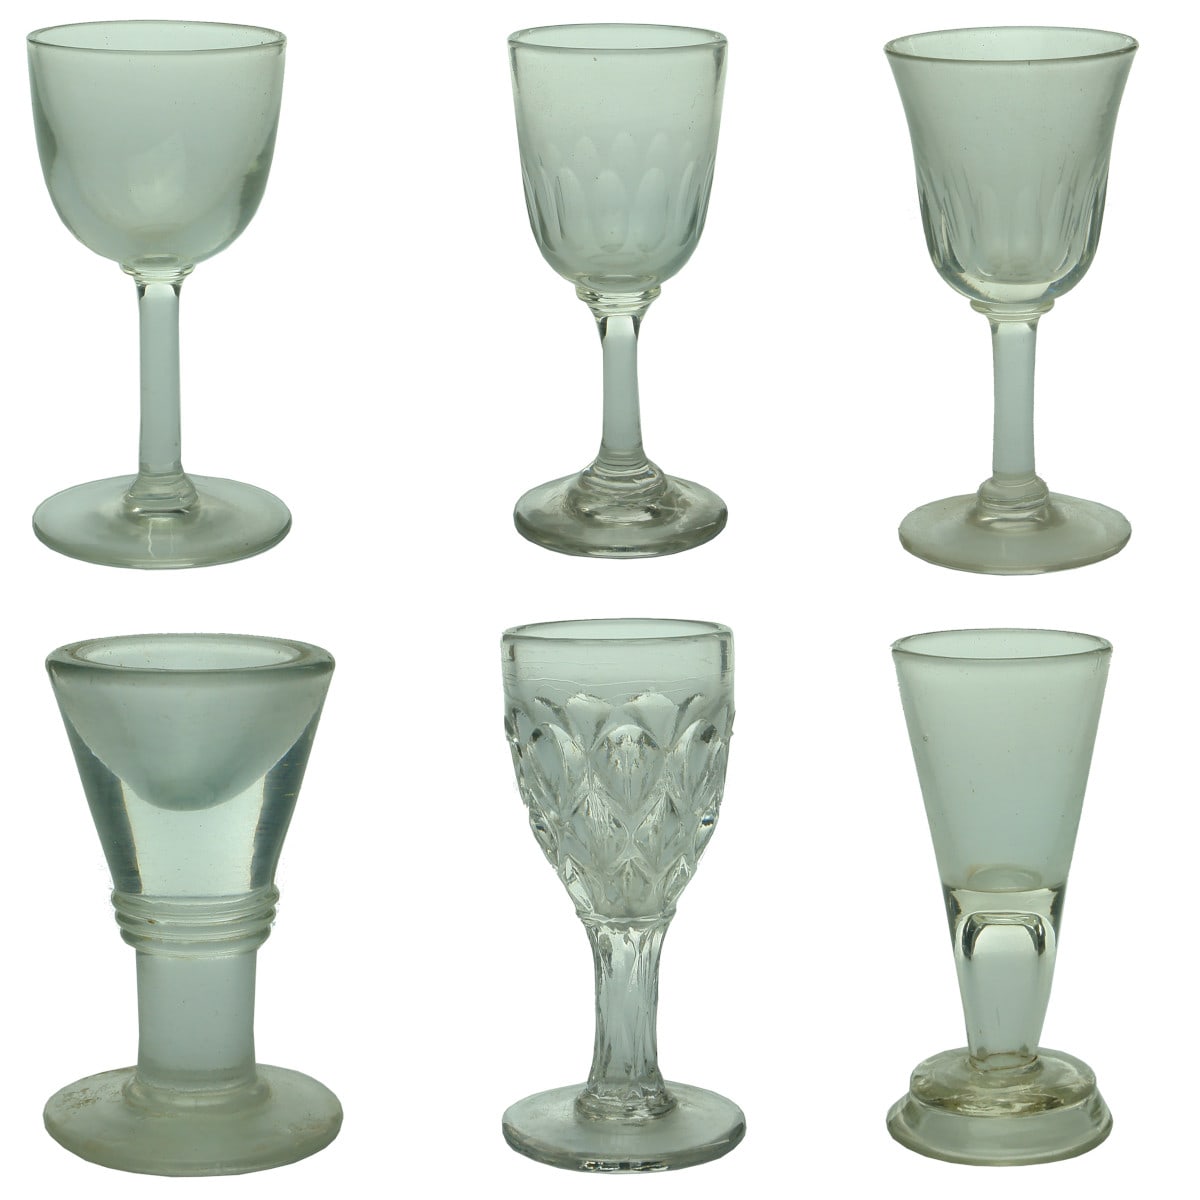 Six Early Glasses: 5 x Port Glasses and a Penny Lick. One Georgian, 4 Victorian era and one later one.